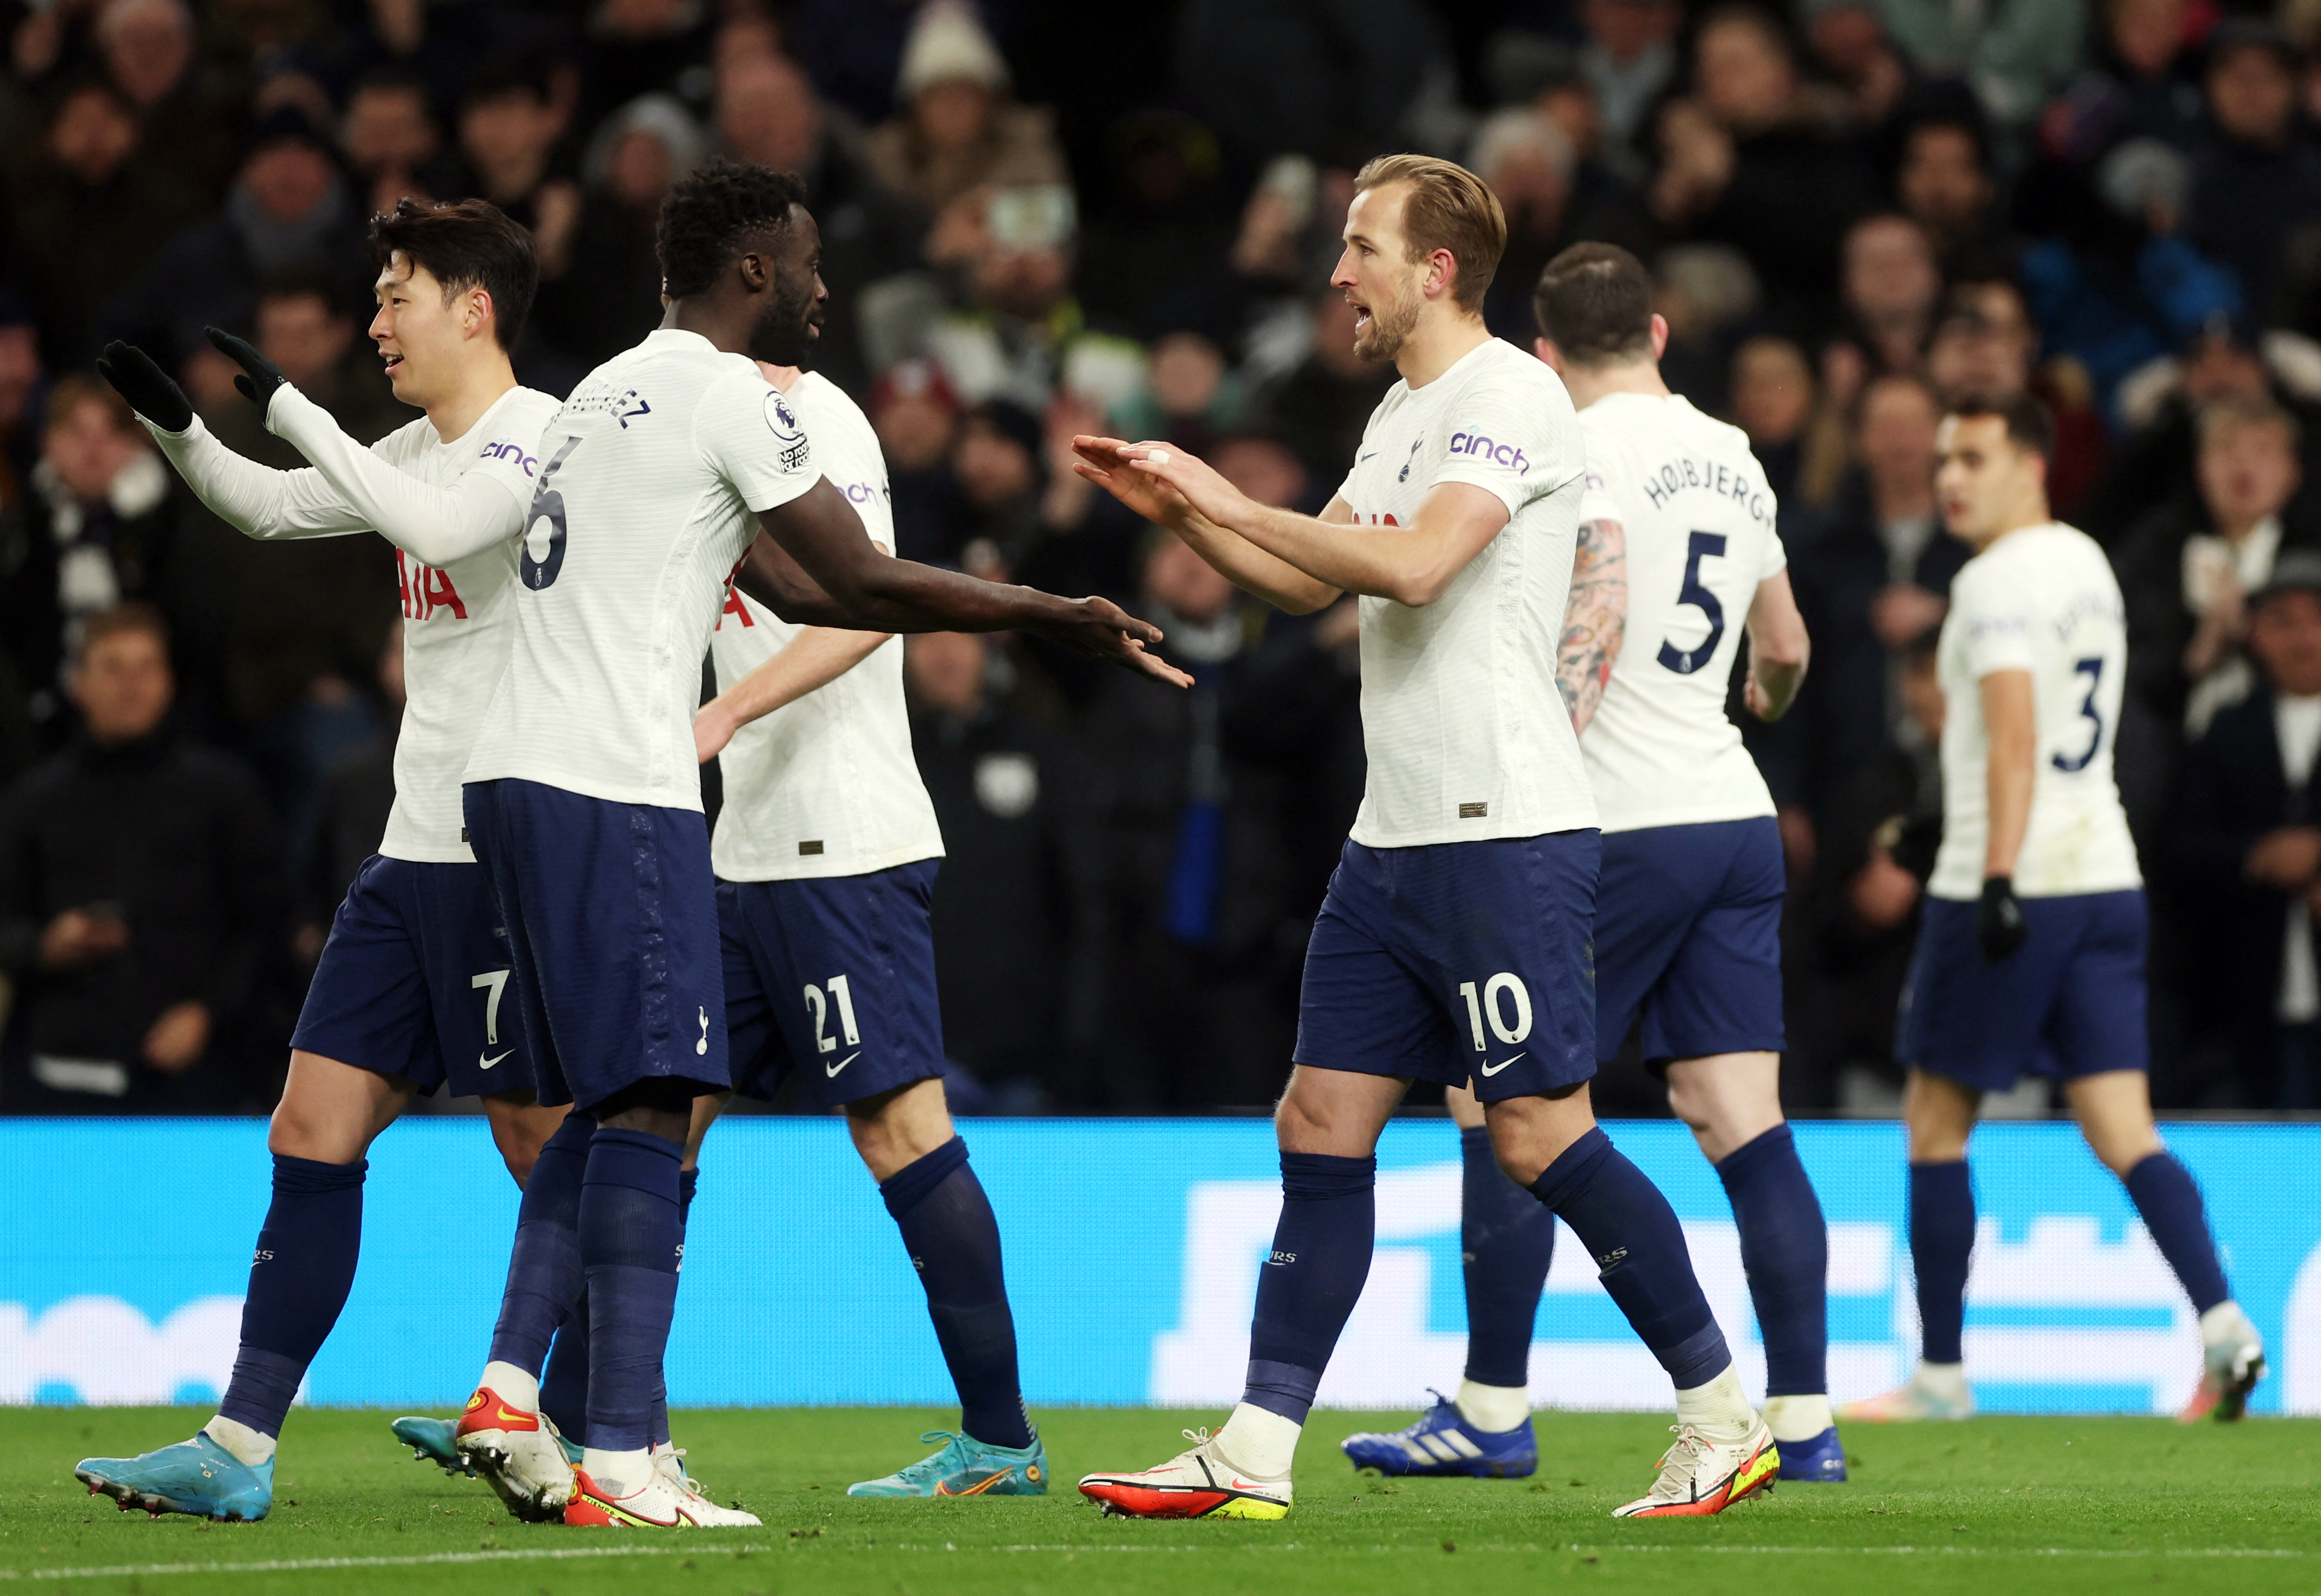 Harry Kane and Spurs are entering a pivotal week – but will it end